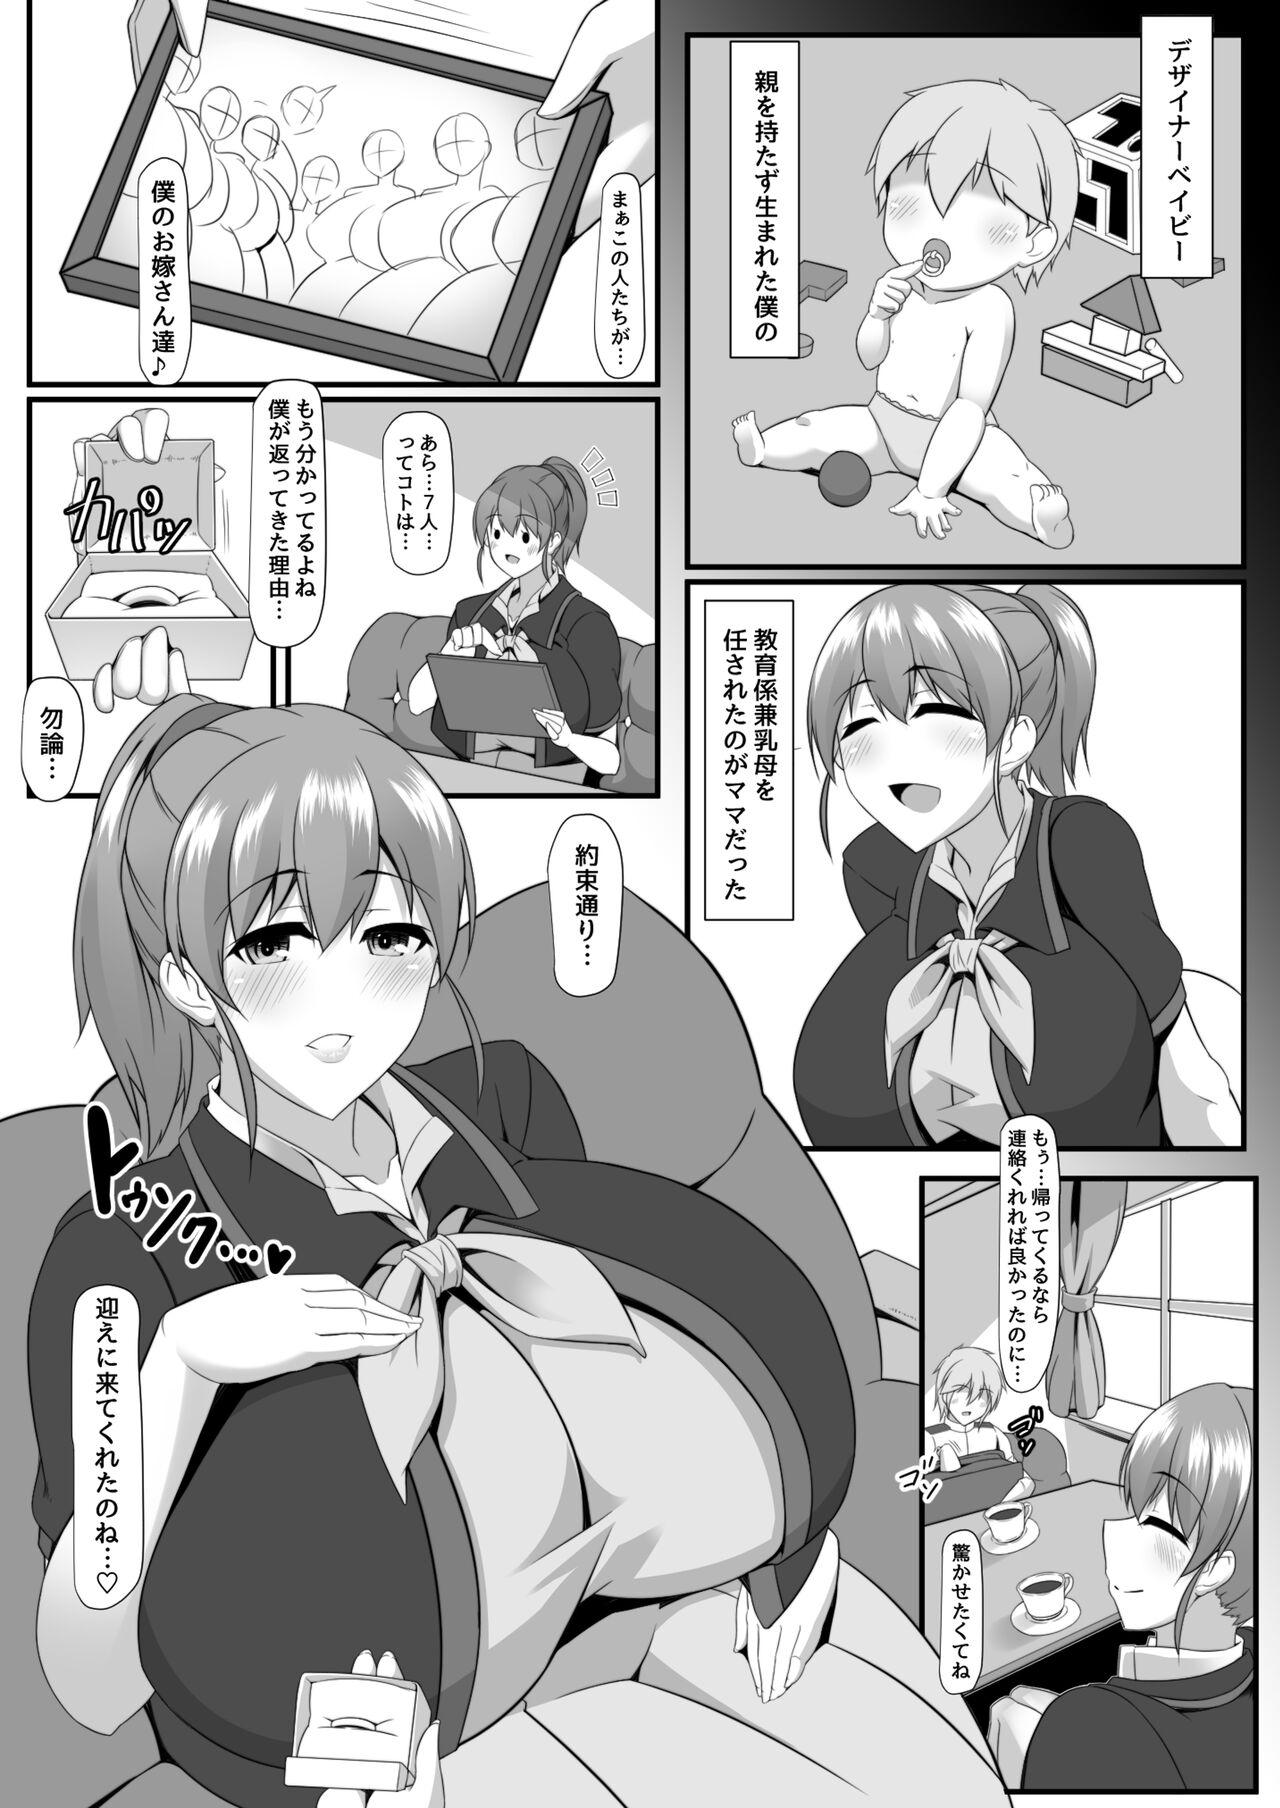 Best Blowjob Bote Colle 10 - Kantai collection Canadian - Page 4